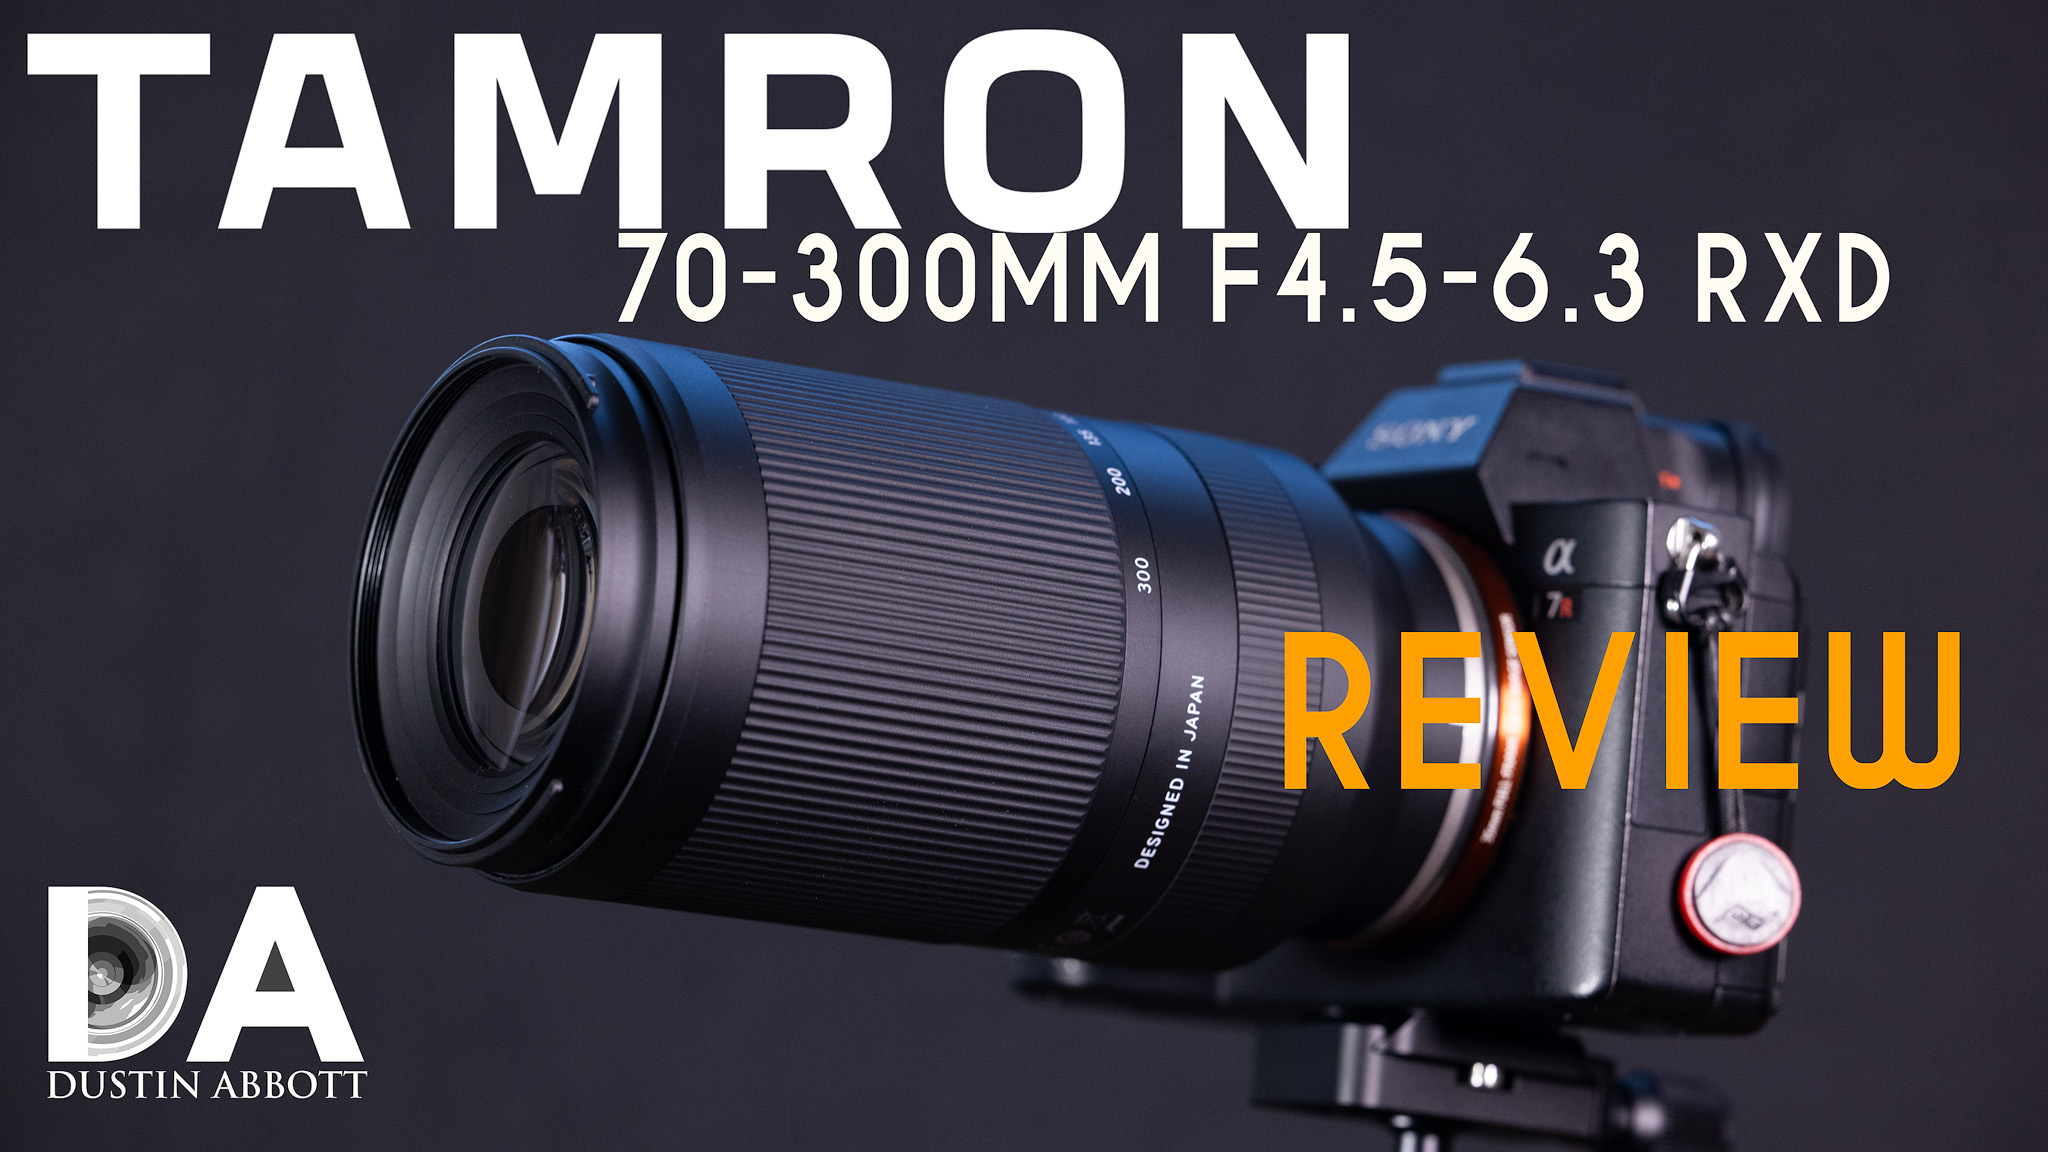 Tamron 70-300mm F4.5-6.3 RXD (A047) Review | 4K